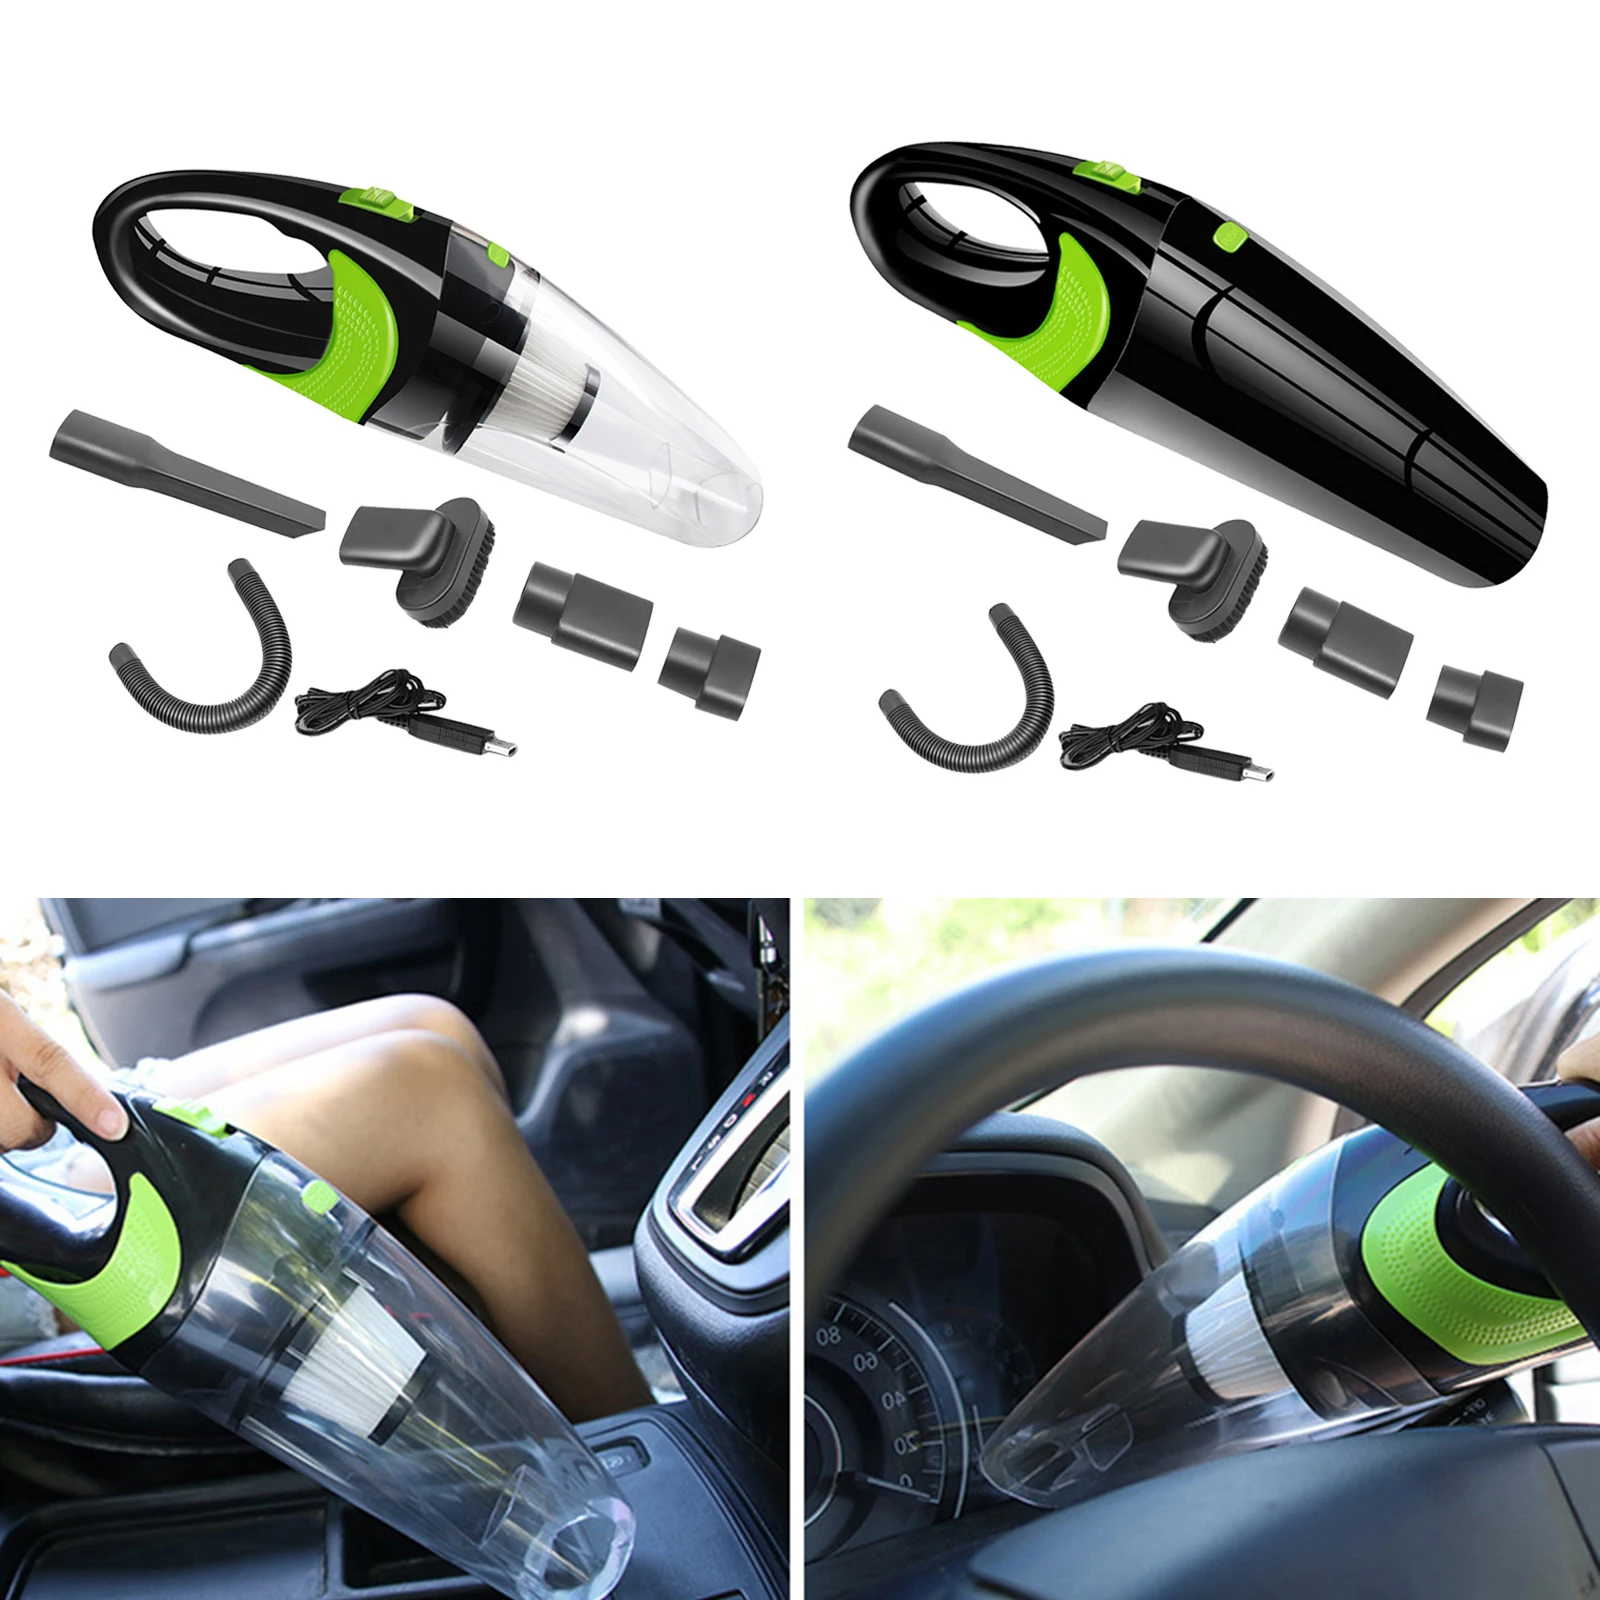 Handheld Car Vacuum 120W High Power 4000PA Wet/Dry for Car Interior Detailing Home Pet Hair Cleaning Accessories